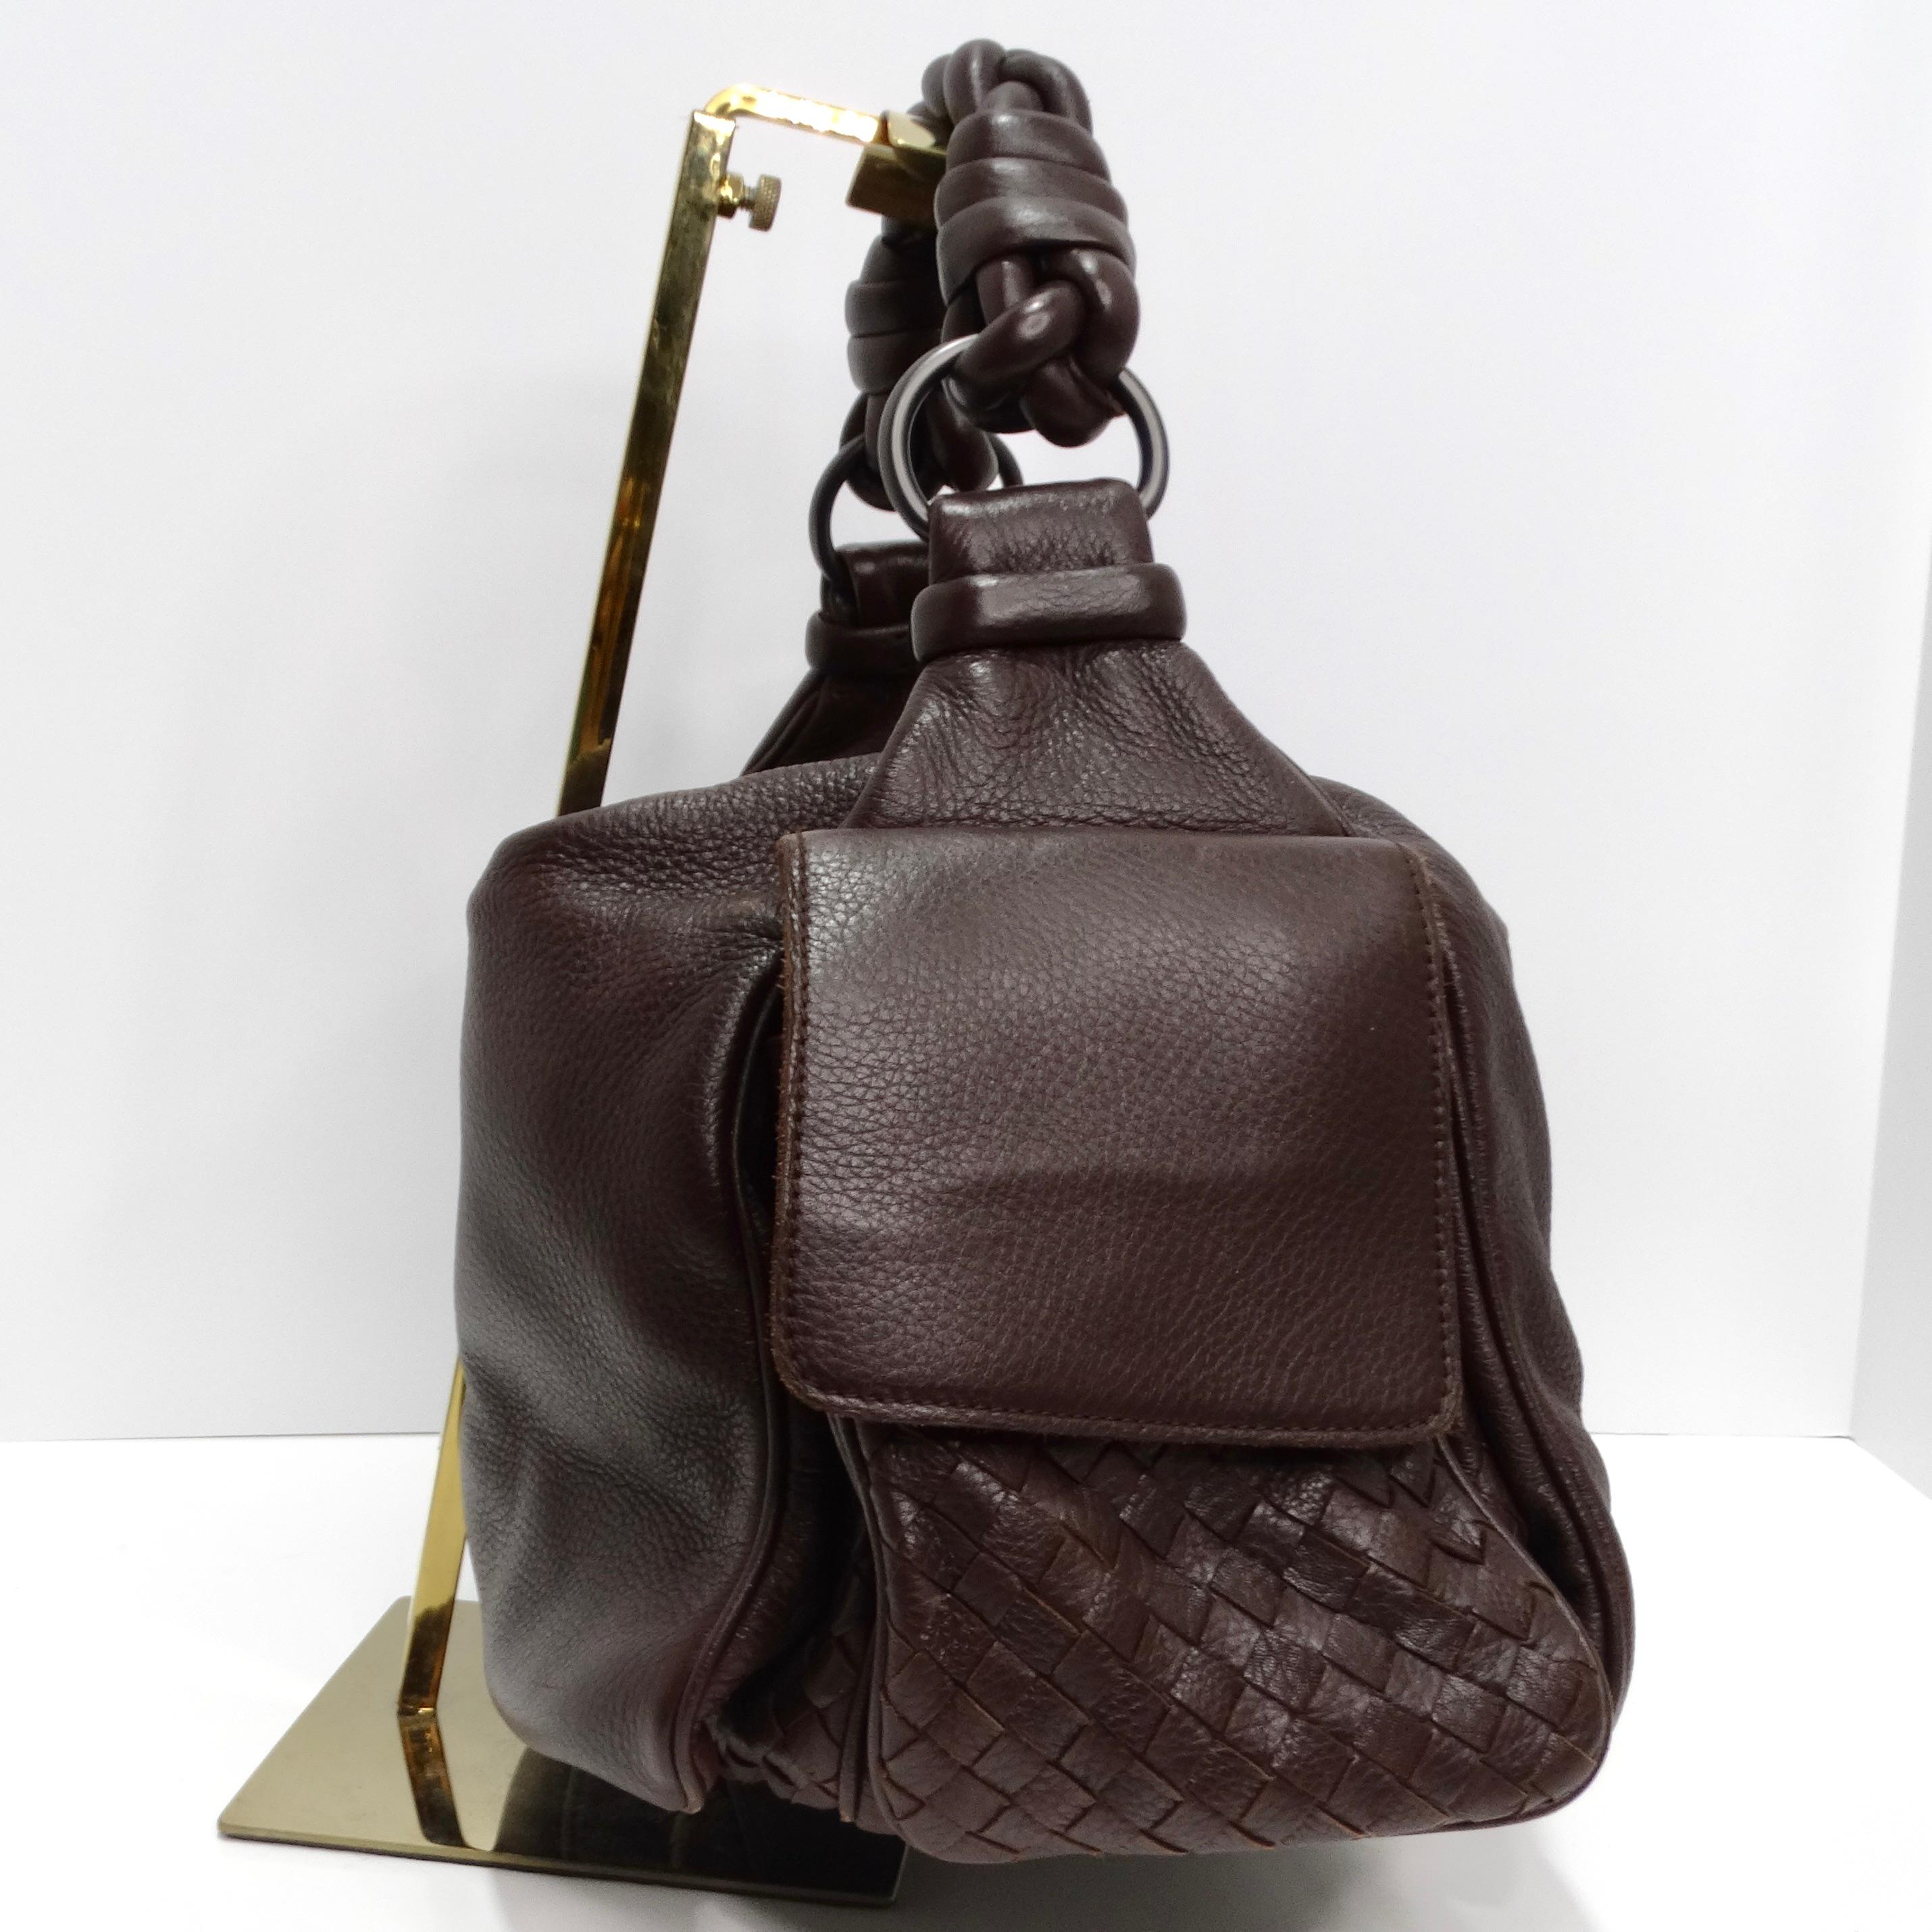 Introducing the Bottega Veneta Cervo Cocker Shoulder Bag, a timeless and versatile accessory designed to elevate your everyday style with understated elegance. Crafted from luxurious brown leather, this hobo-style shoulder bag boasts a chic slouchy